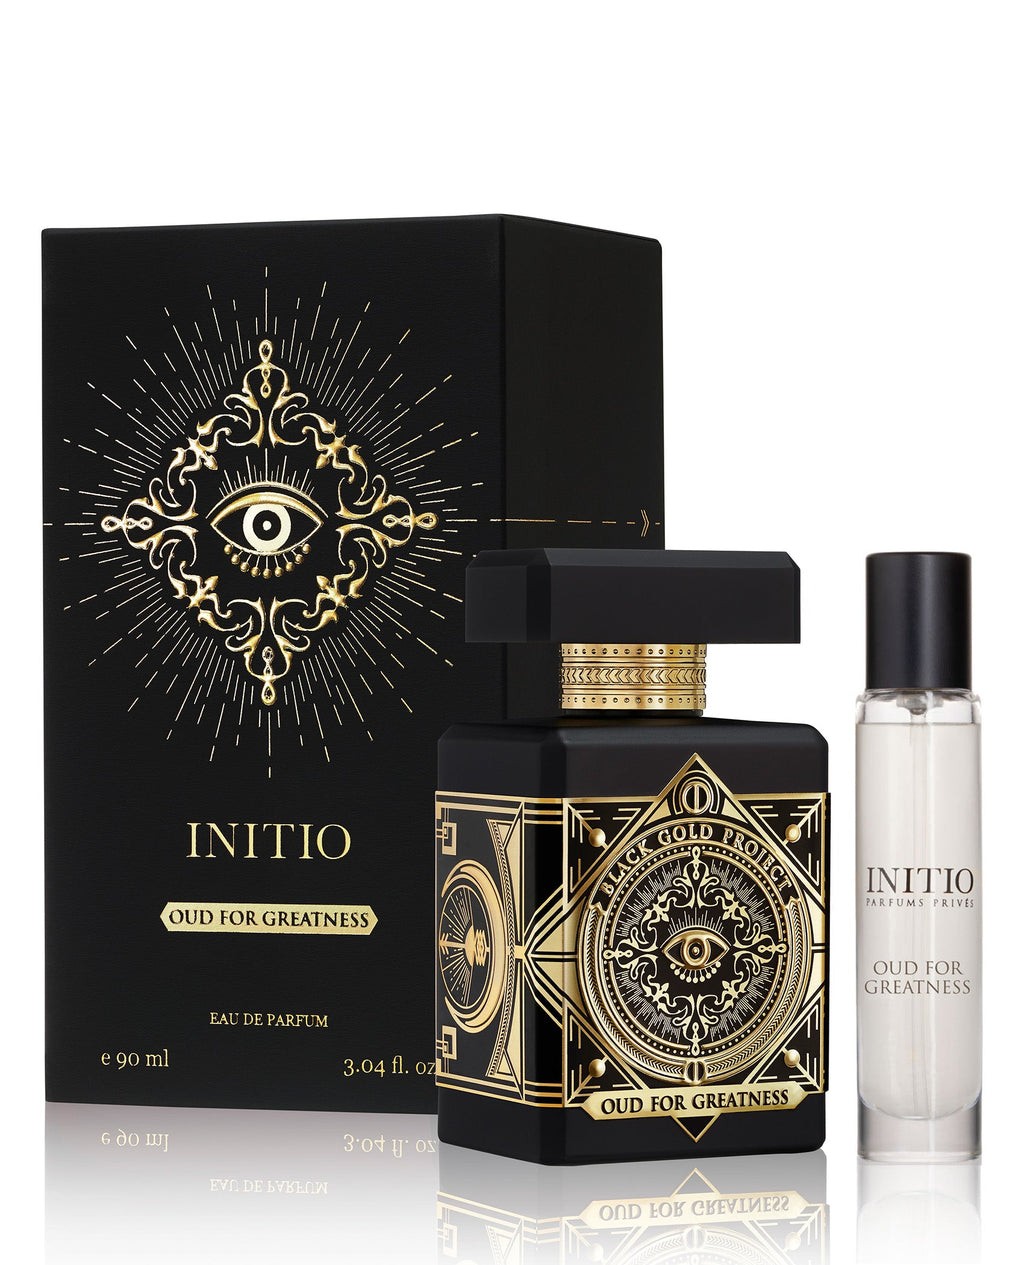 OUD FOR GREATNESS SET – INITIO Privés US Parfums